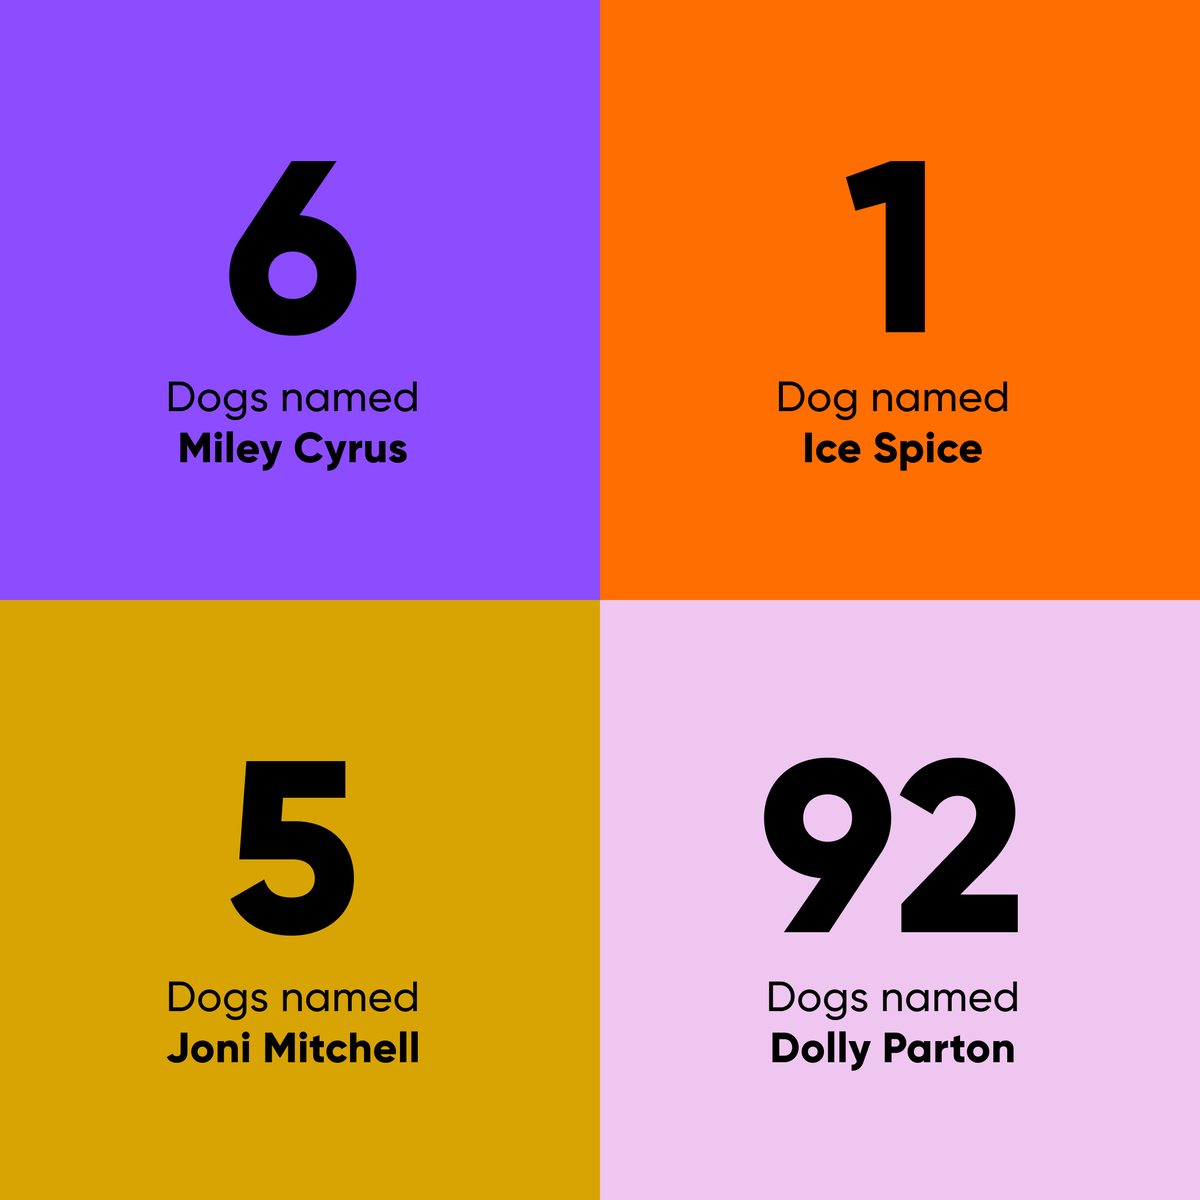 Watching the Grammys tonight? Check out how many Embarked dogs share their name with some VERY talented artists. 🎤🐕 Let's get the 'paw-ty' started! 🐾 #grammys2024 #dognames #GrammysNight #TaylorSwift #Rihanna #SZA #BillieEilish #MileyCyrus #IceSpice #JoniMitchell #DollyParton